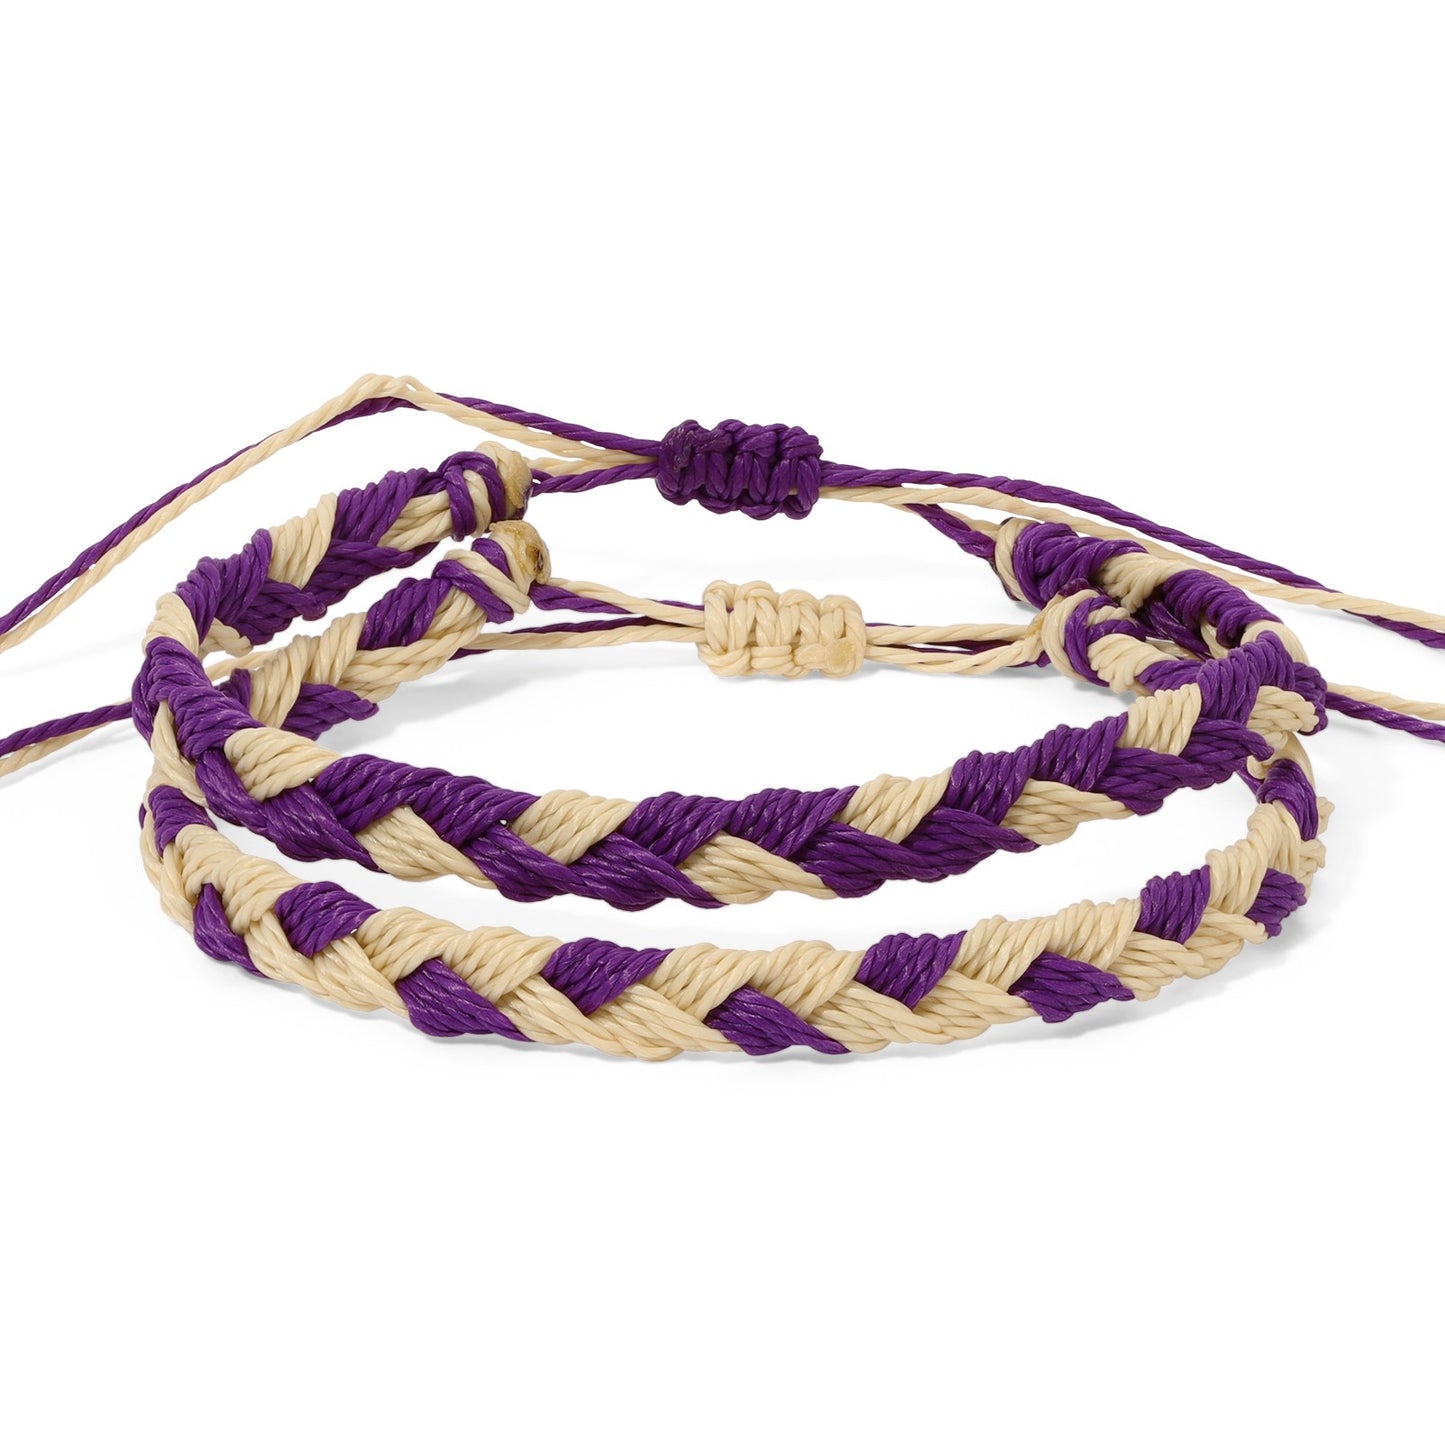 Purple and Gold Team Color Braided Bracelets - Set of 2